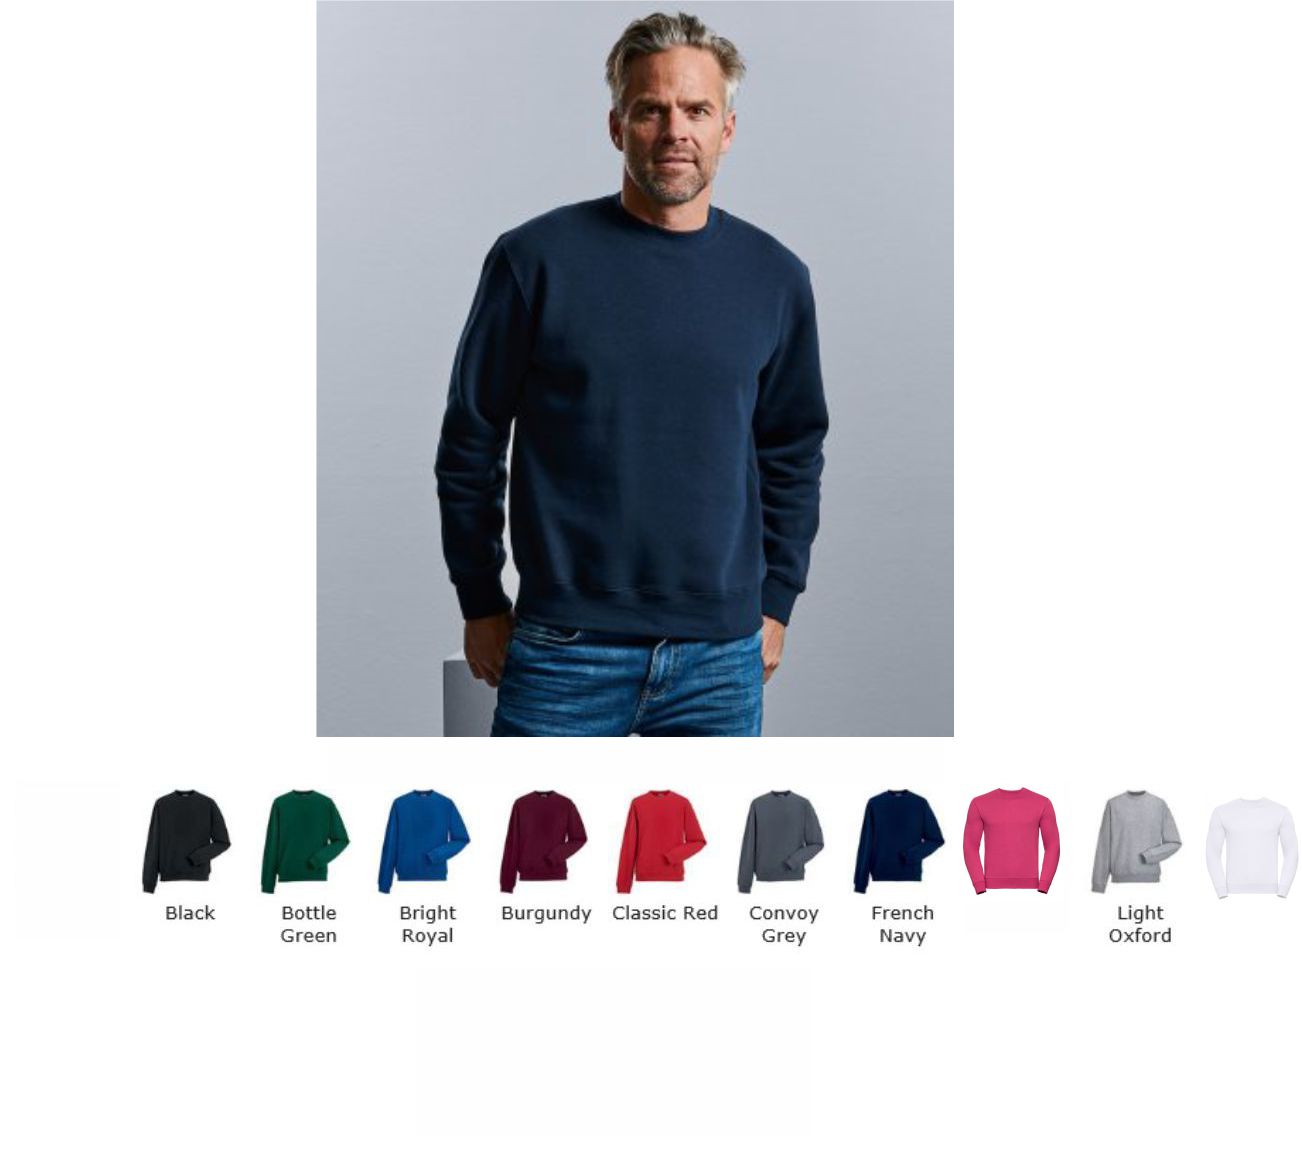 Russells 262M set in sleeve Sweatshirt - Click Image to Close